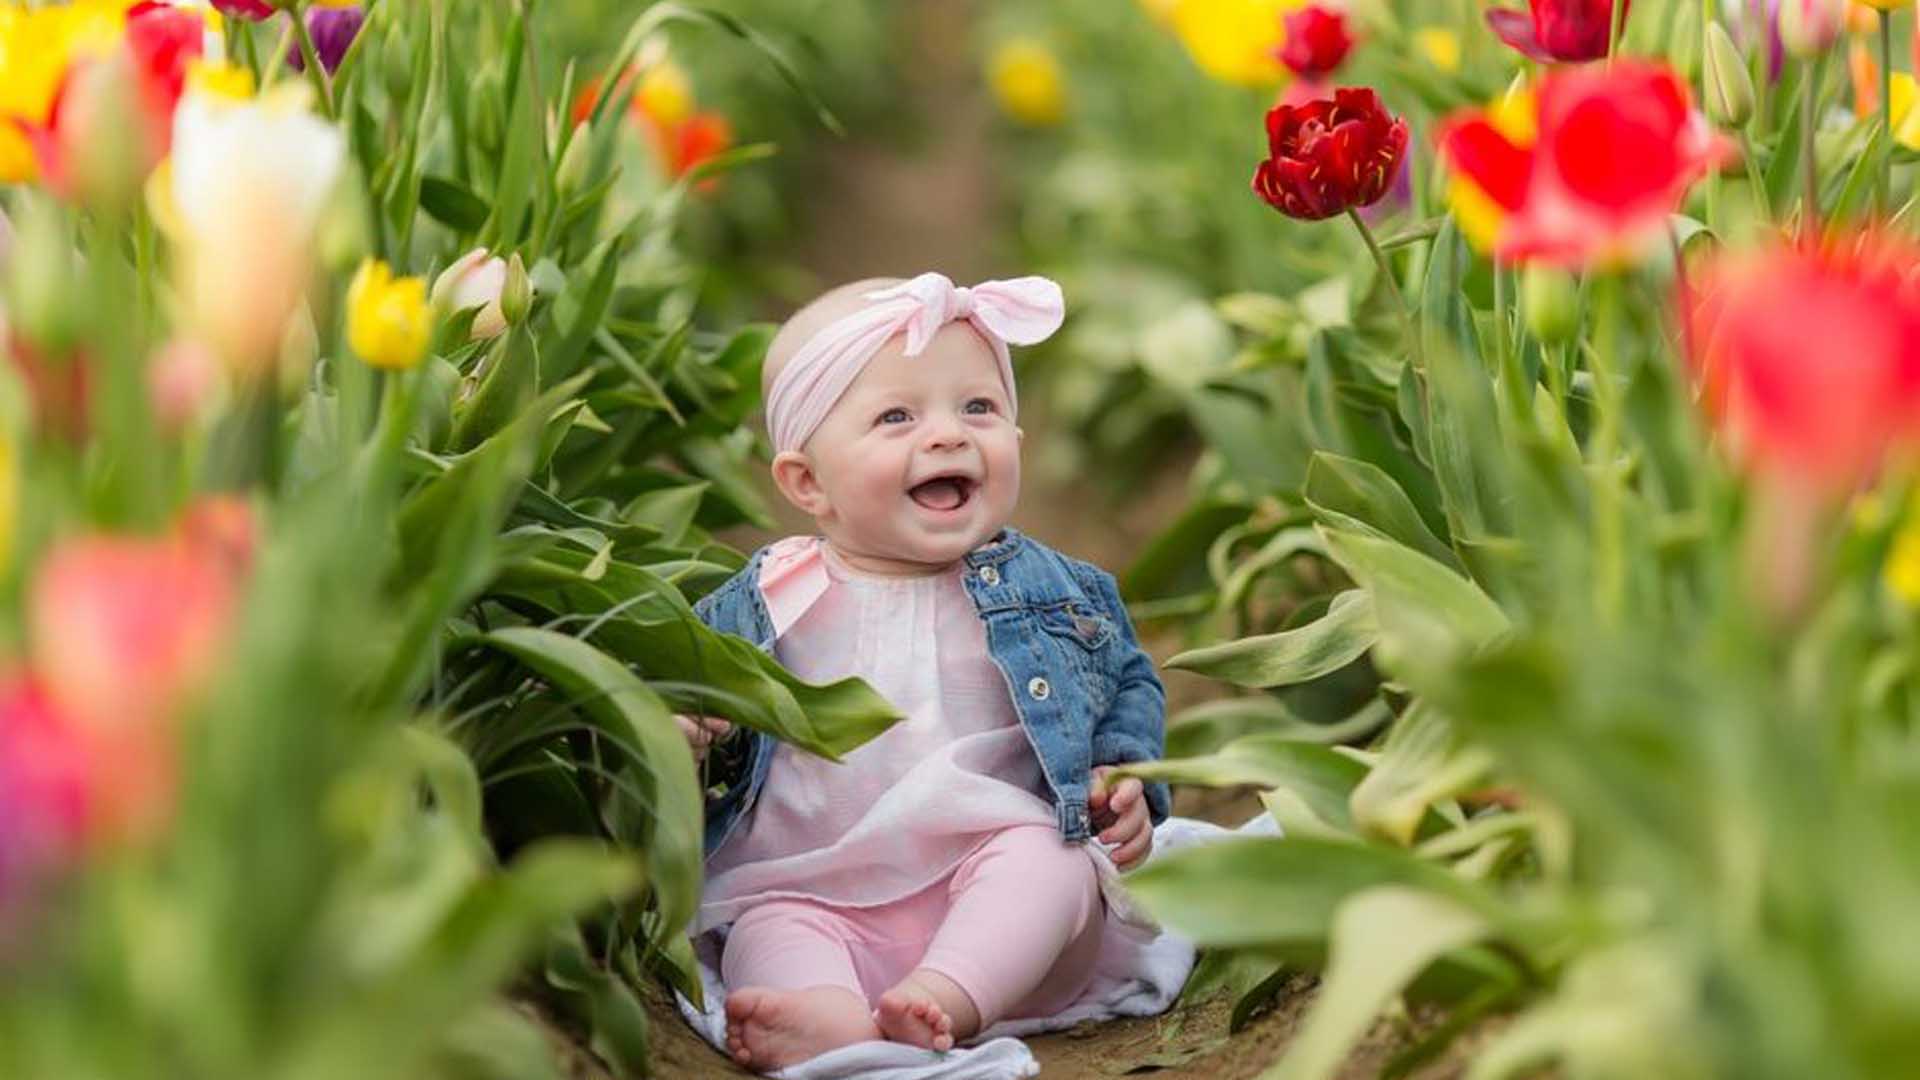 Smiling Cute Baby Girl Is Wearing Light Pink Dress Blue Jeans Overcoat Sitting In Colorful Flowers Wallpaper 2K Cute